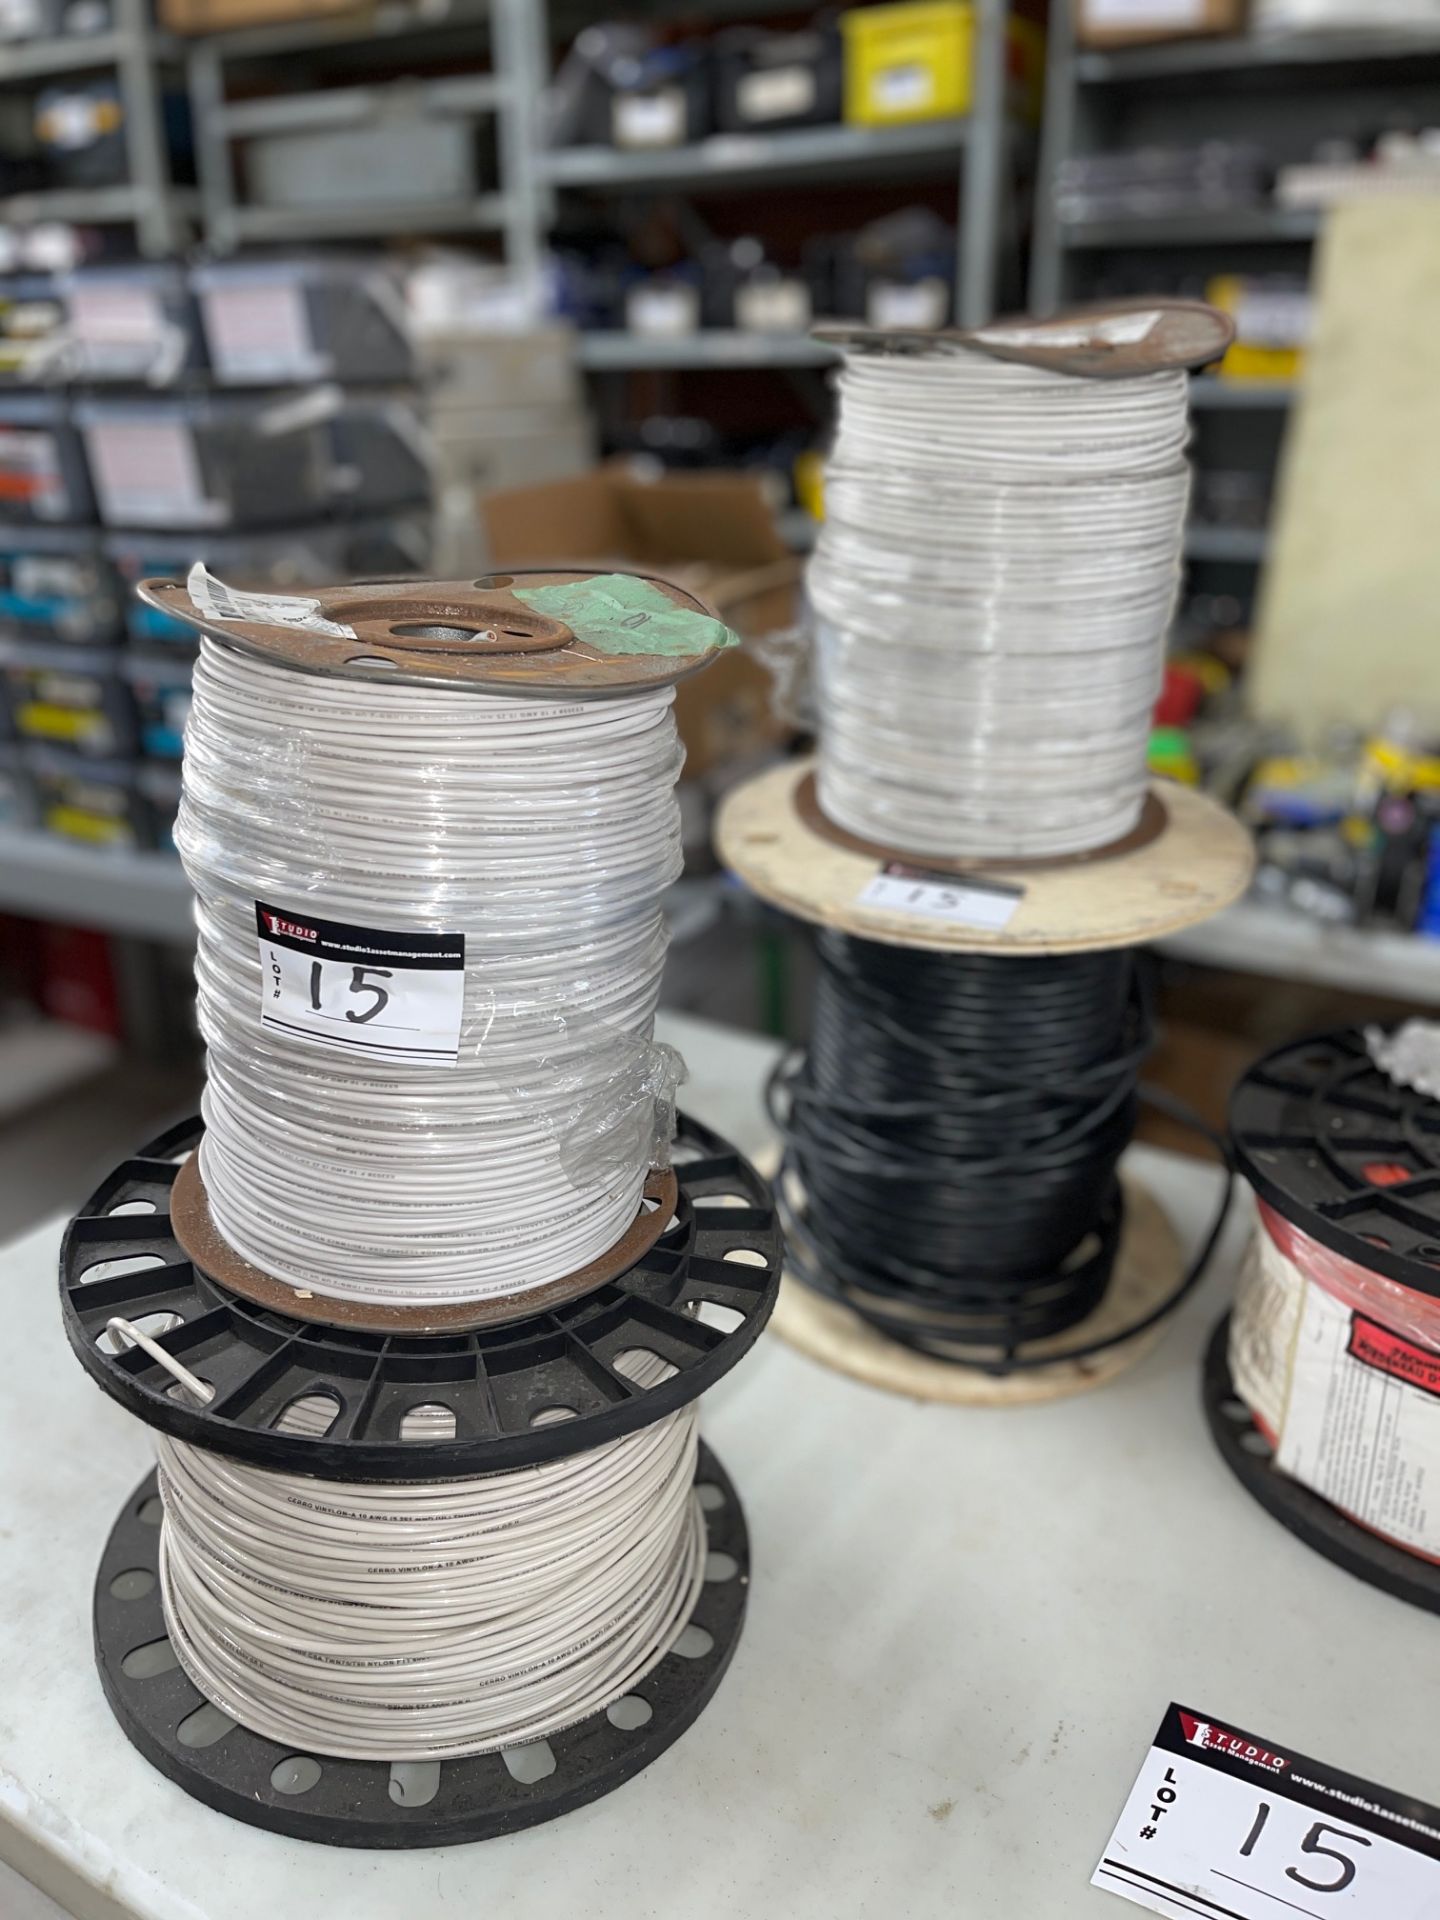 LOT/ (7) SPOOLS OF WIRE, FULL SPOOLS, T90, 10 GAUGE WHITE AND RED 6 X 300 METER SPOOLS APP AND T90 - Image 3 of 6